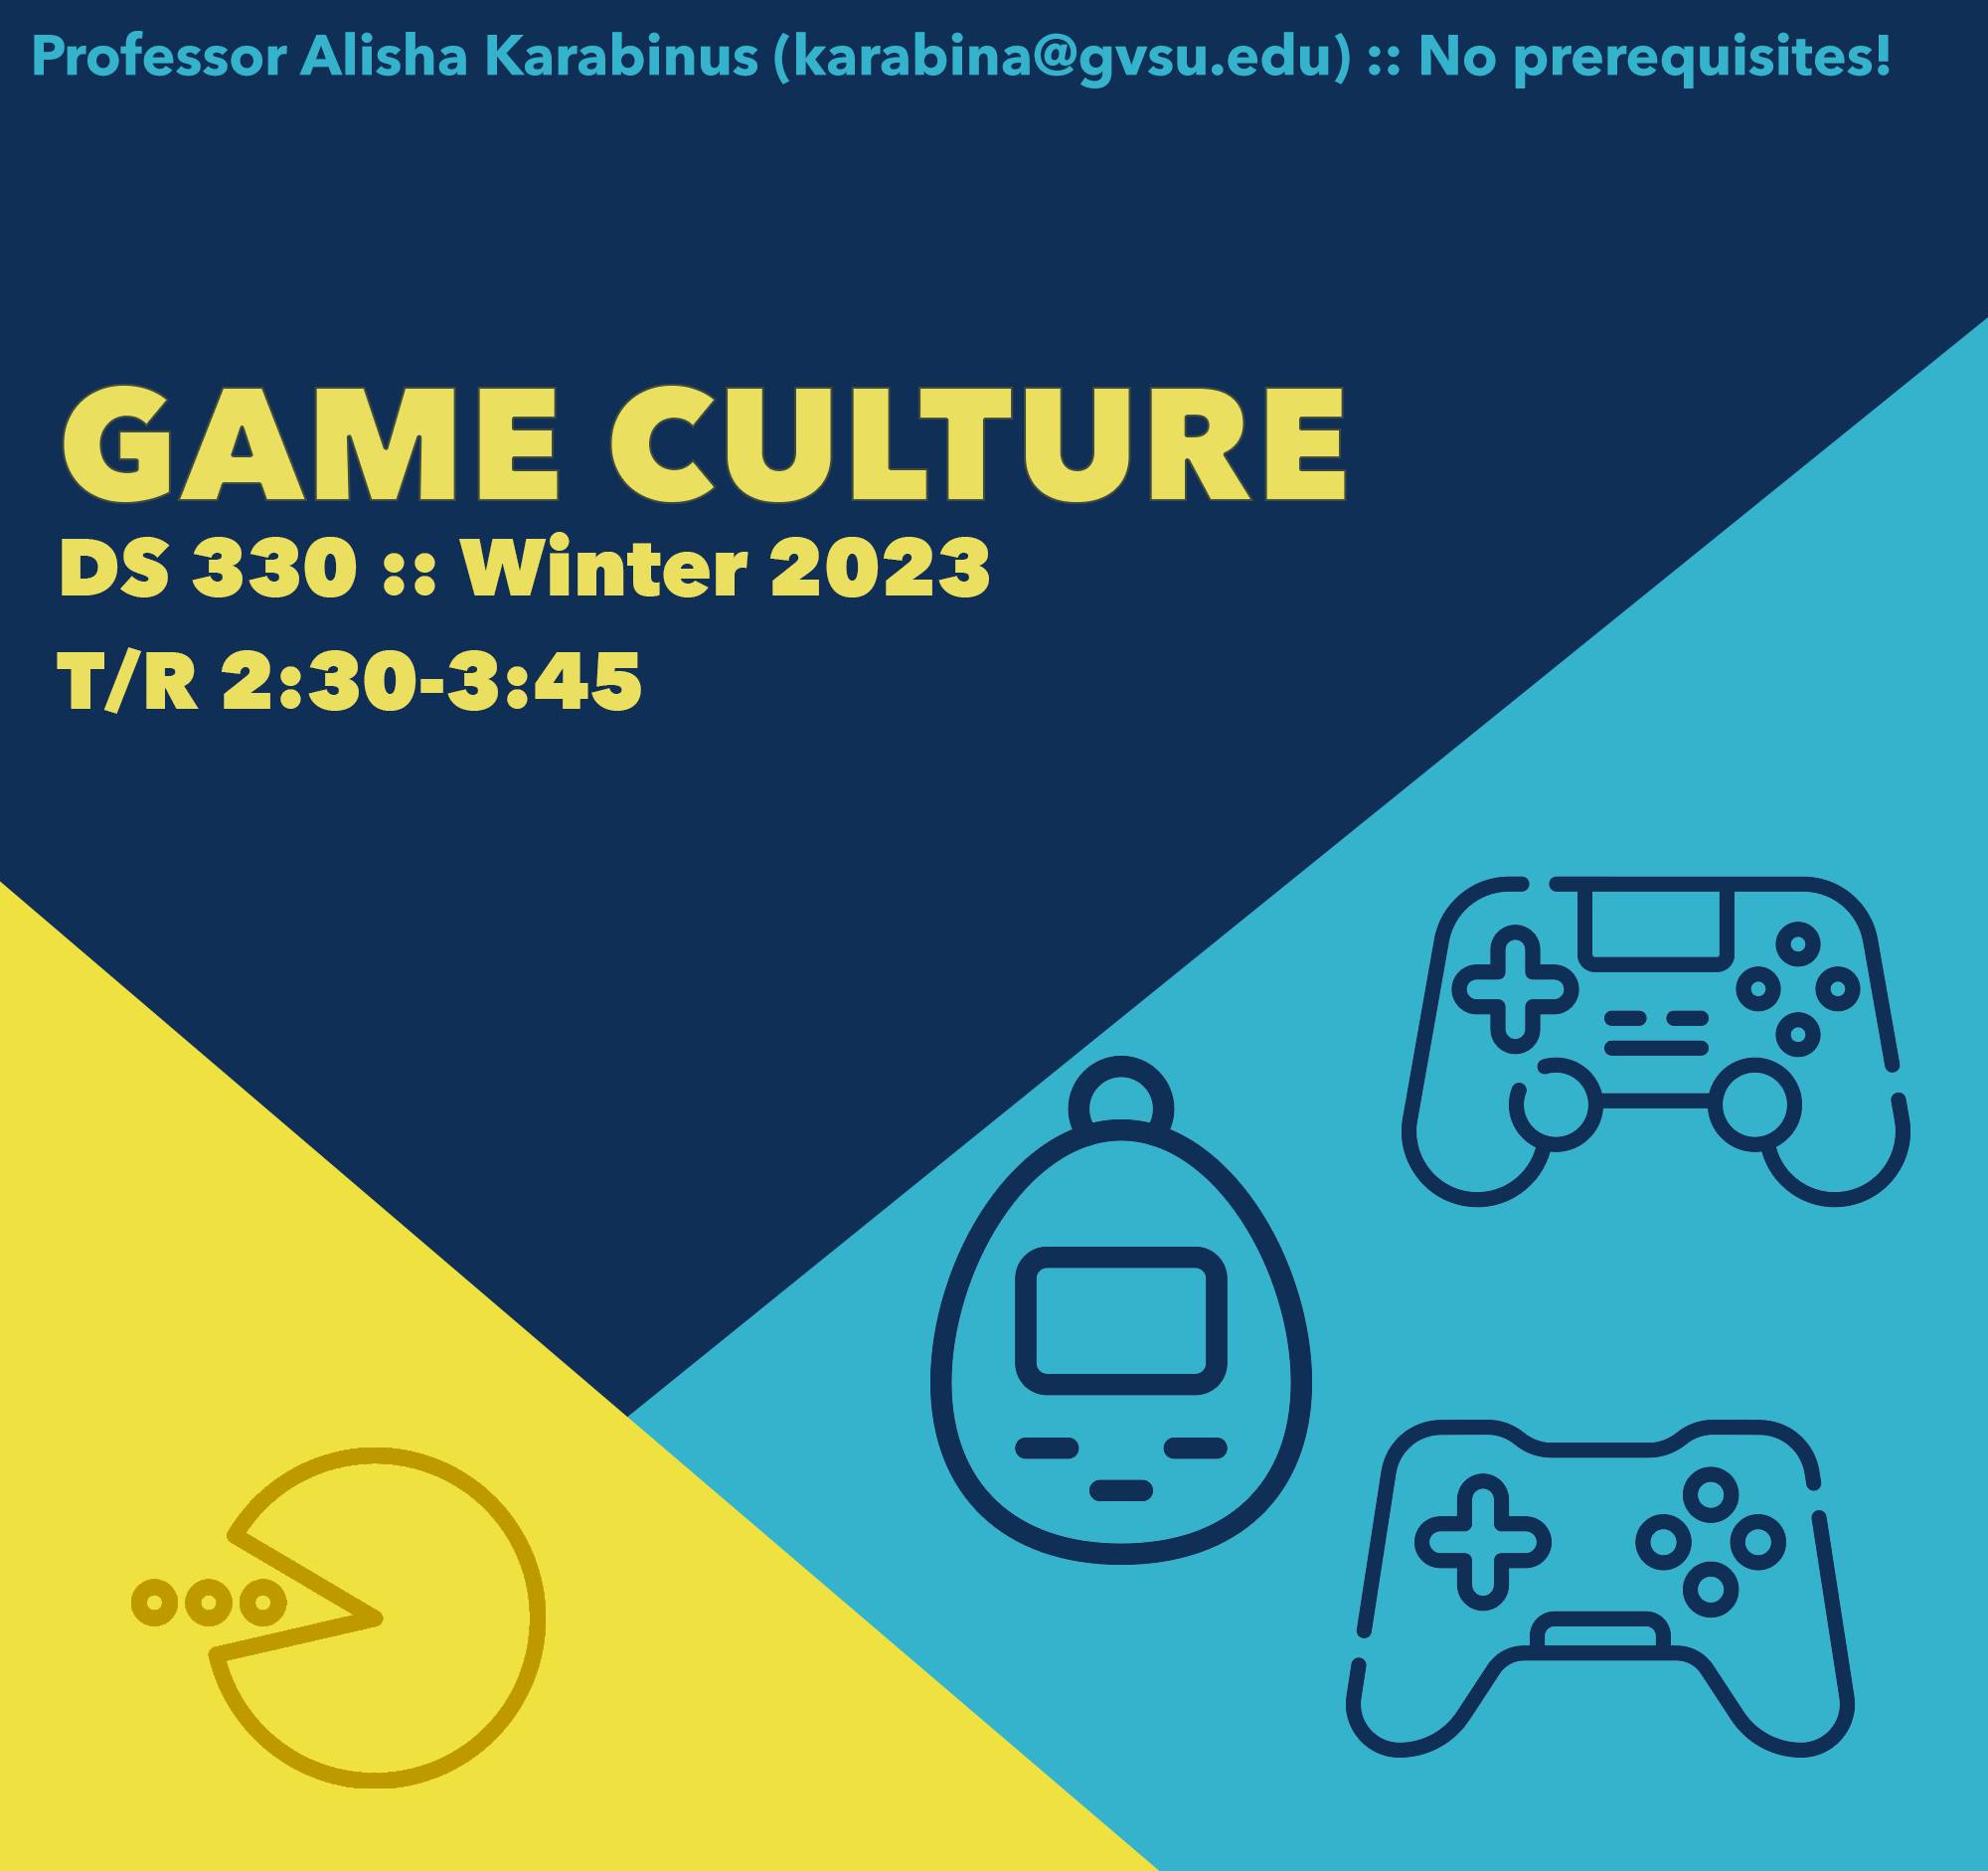 Image of promotional flier for DS 330, Gaming Culture